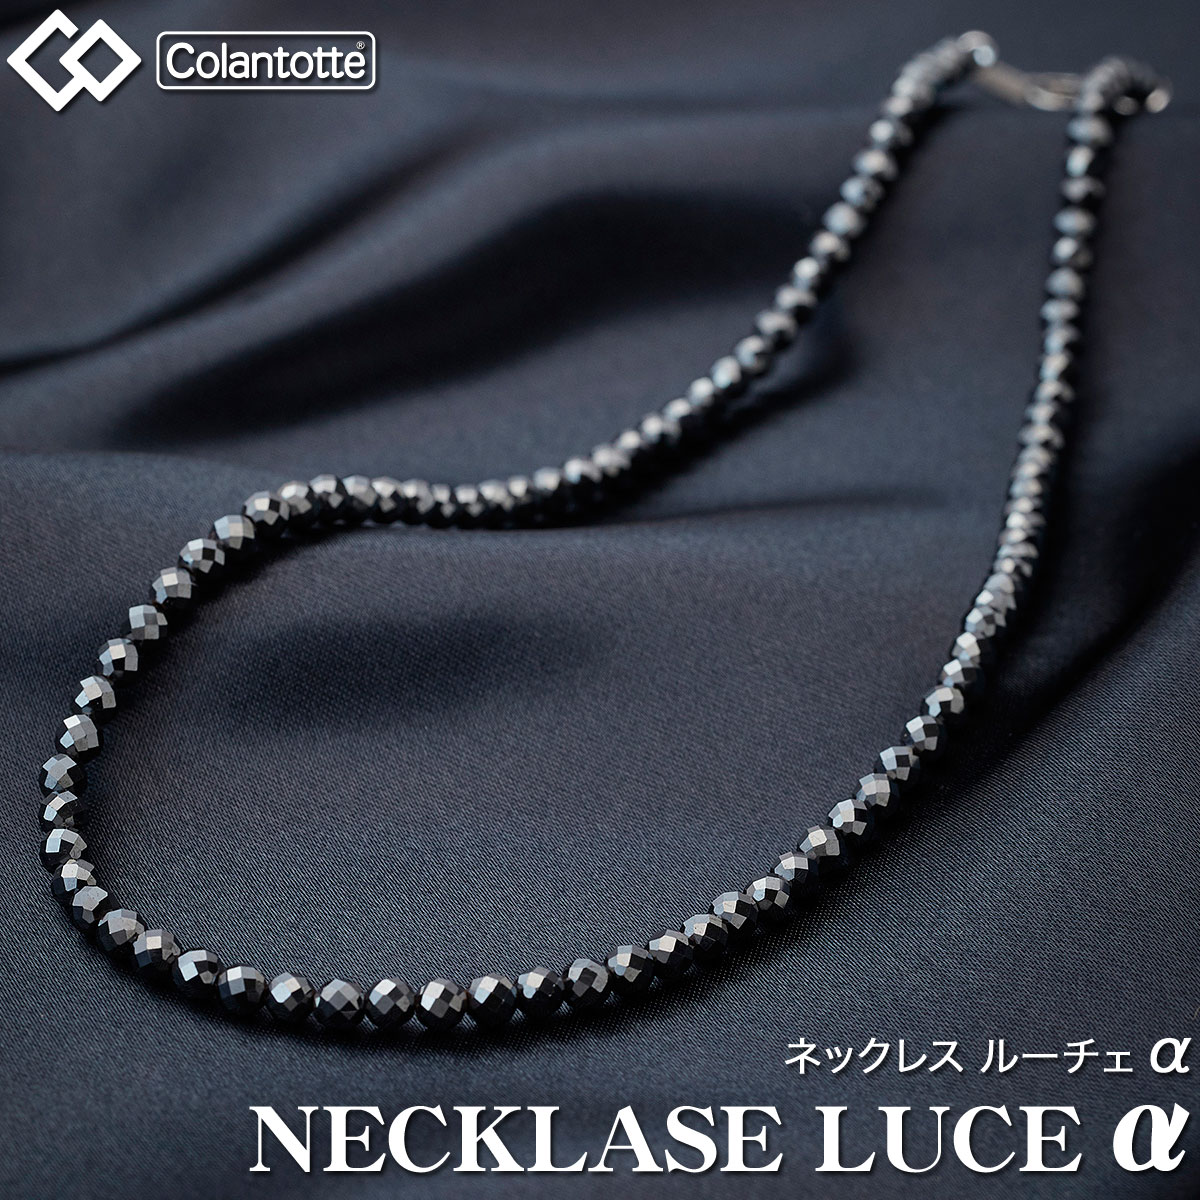 Colantotte コラントッテ 正規品 NECKLACE LUCE α ネックレス ルーチェ アルファ 男女兼用 磁気ネックレス 「 ABARH …